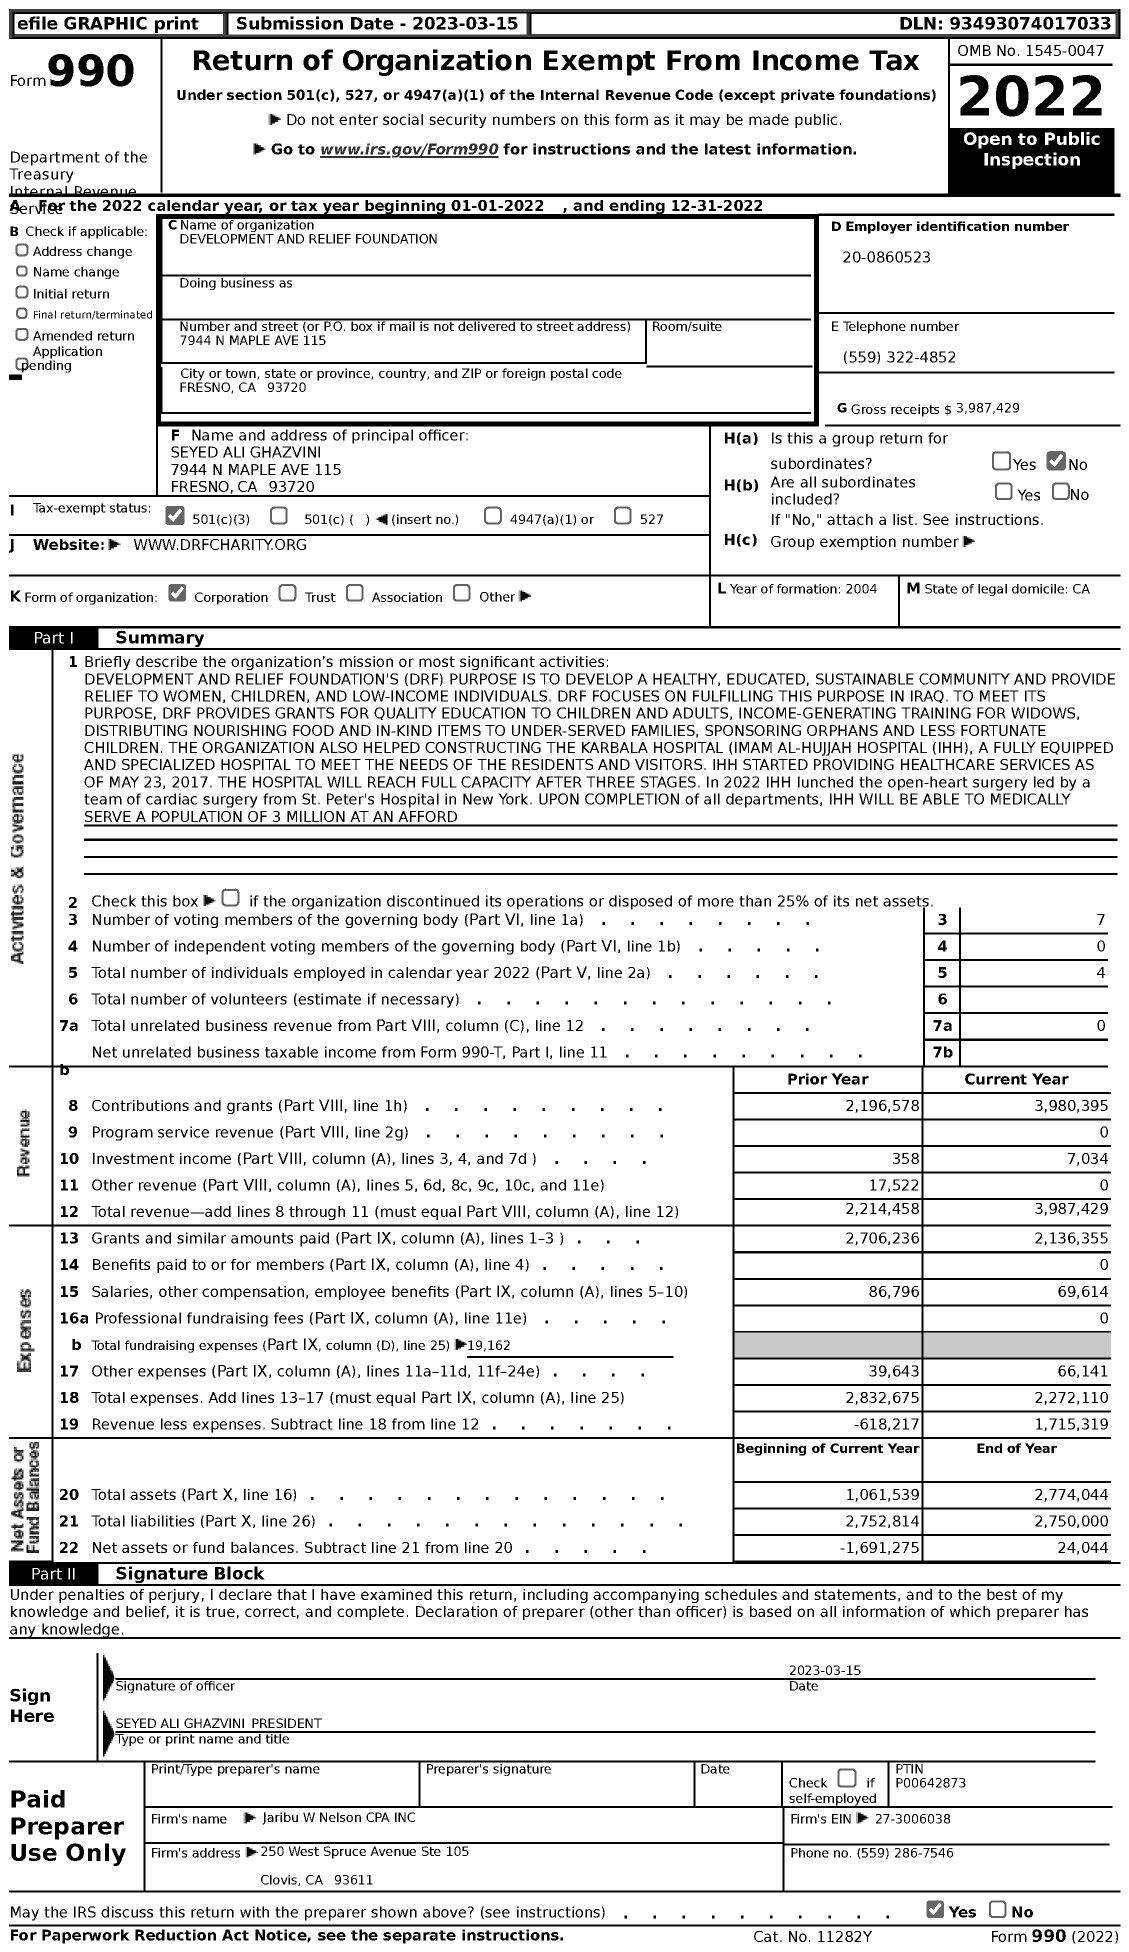 Image of first page of 2022 Form 990 for ATTN: Seyed Ali Ghazvini (DRF)